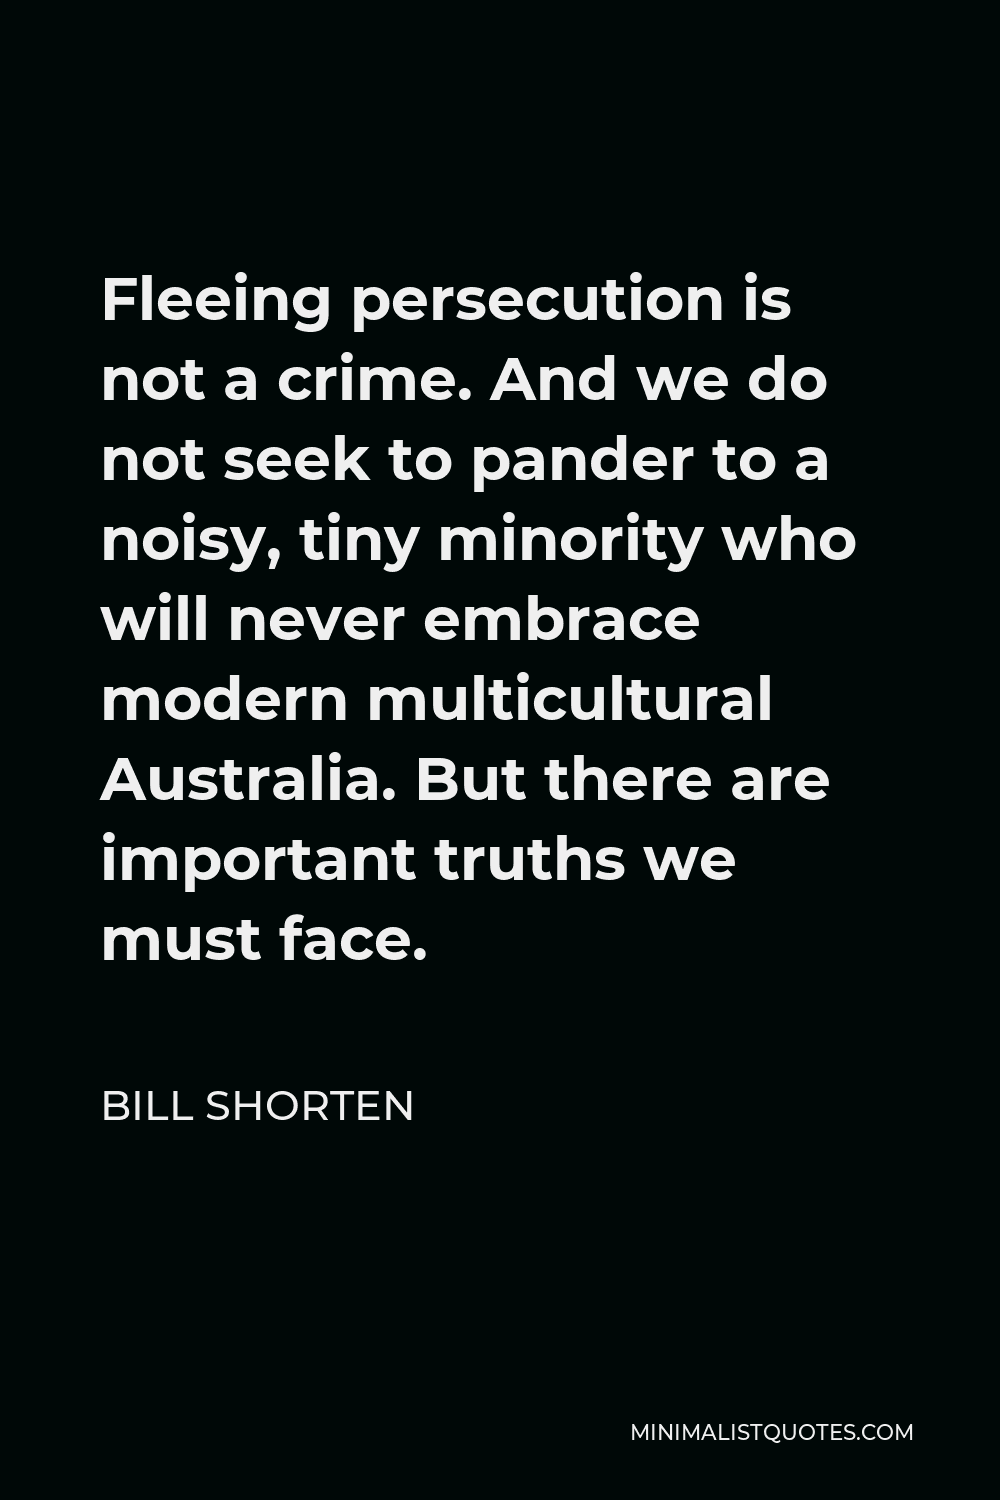 Bill Shorten Quote - Fleeing persecution is not a crime. And we do not seek to pander to a noisy, tiny minority who will never embrace modern multicultural Australia. But there are important truths we must face.